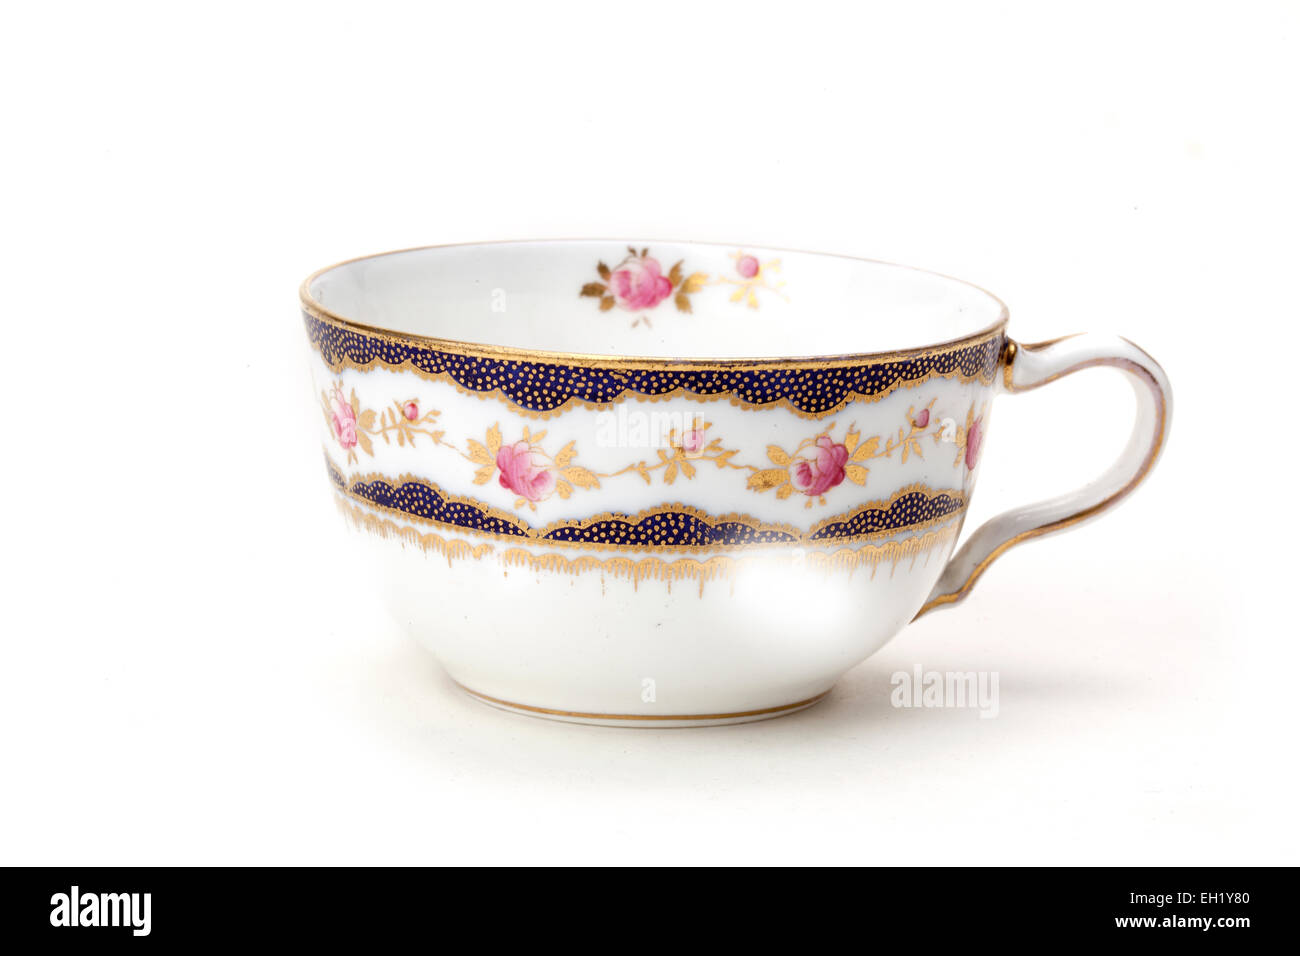 Old Wedgwood fine china tea cup decorated in gold, blue & pink roses Stock Photo